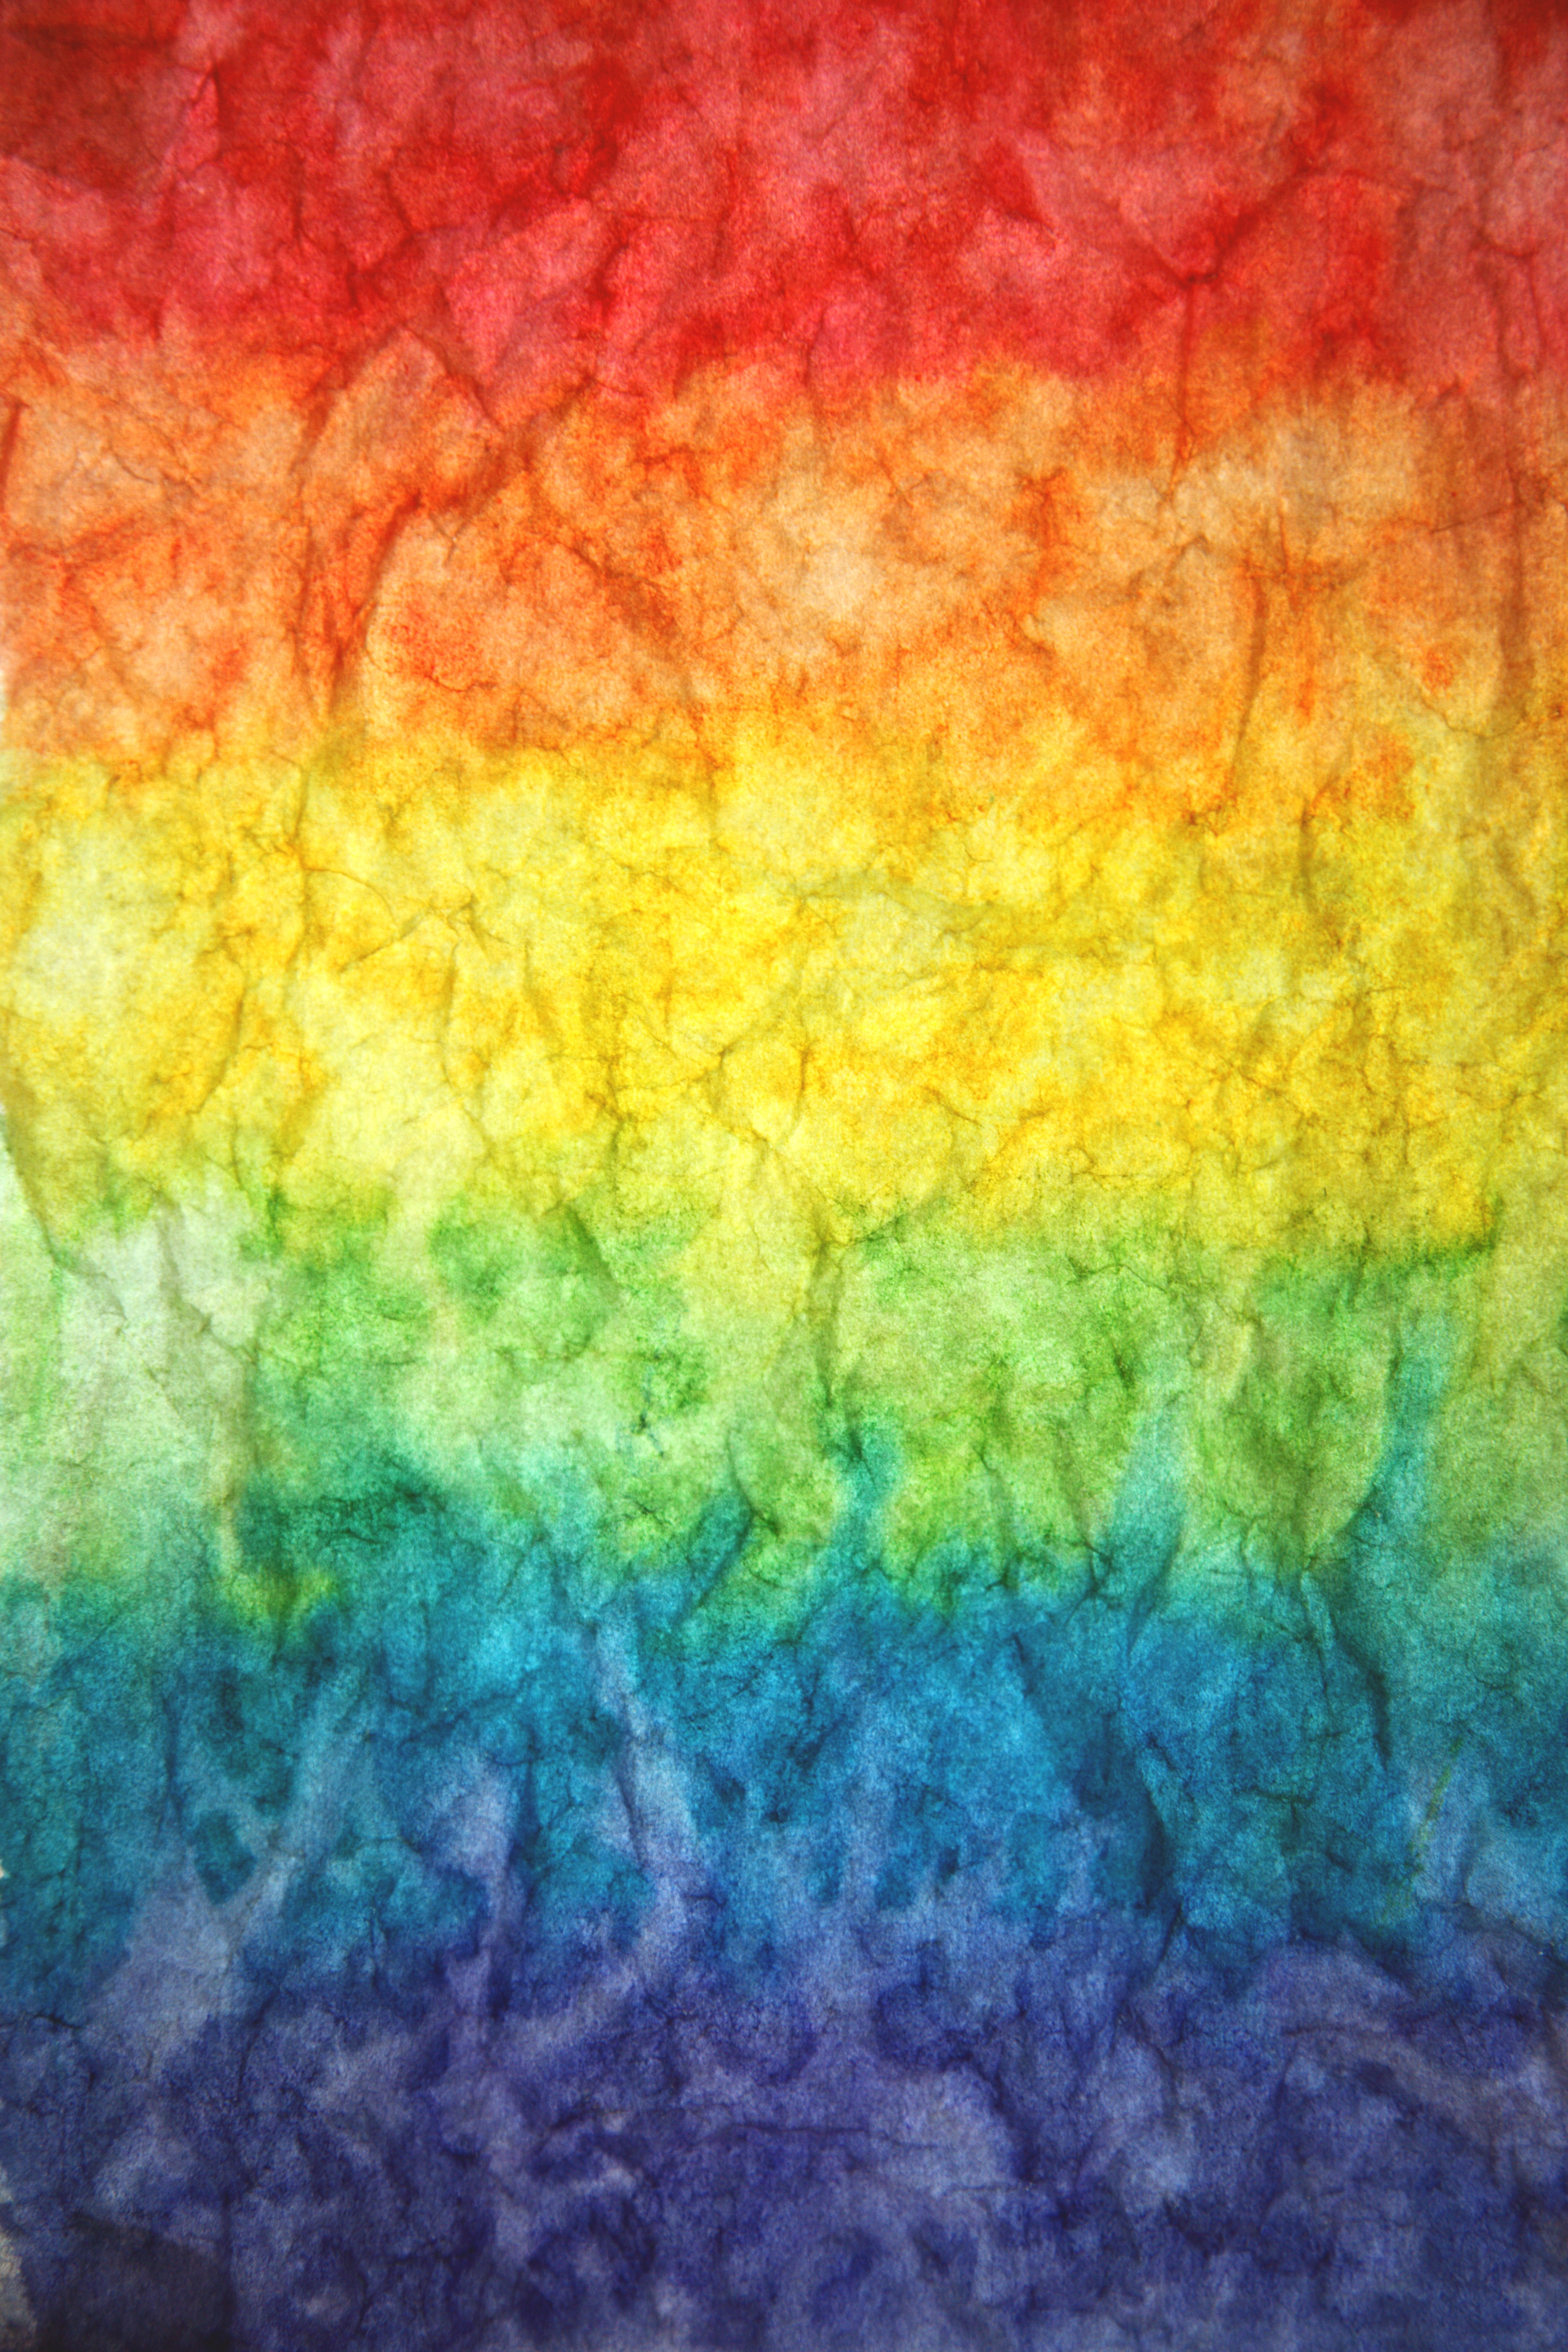 Textured paper watercolor paint rainbow background.